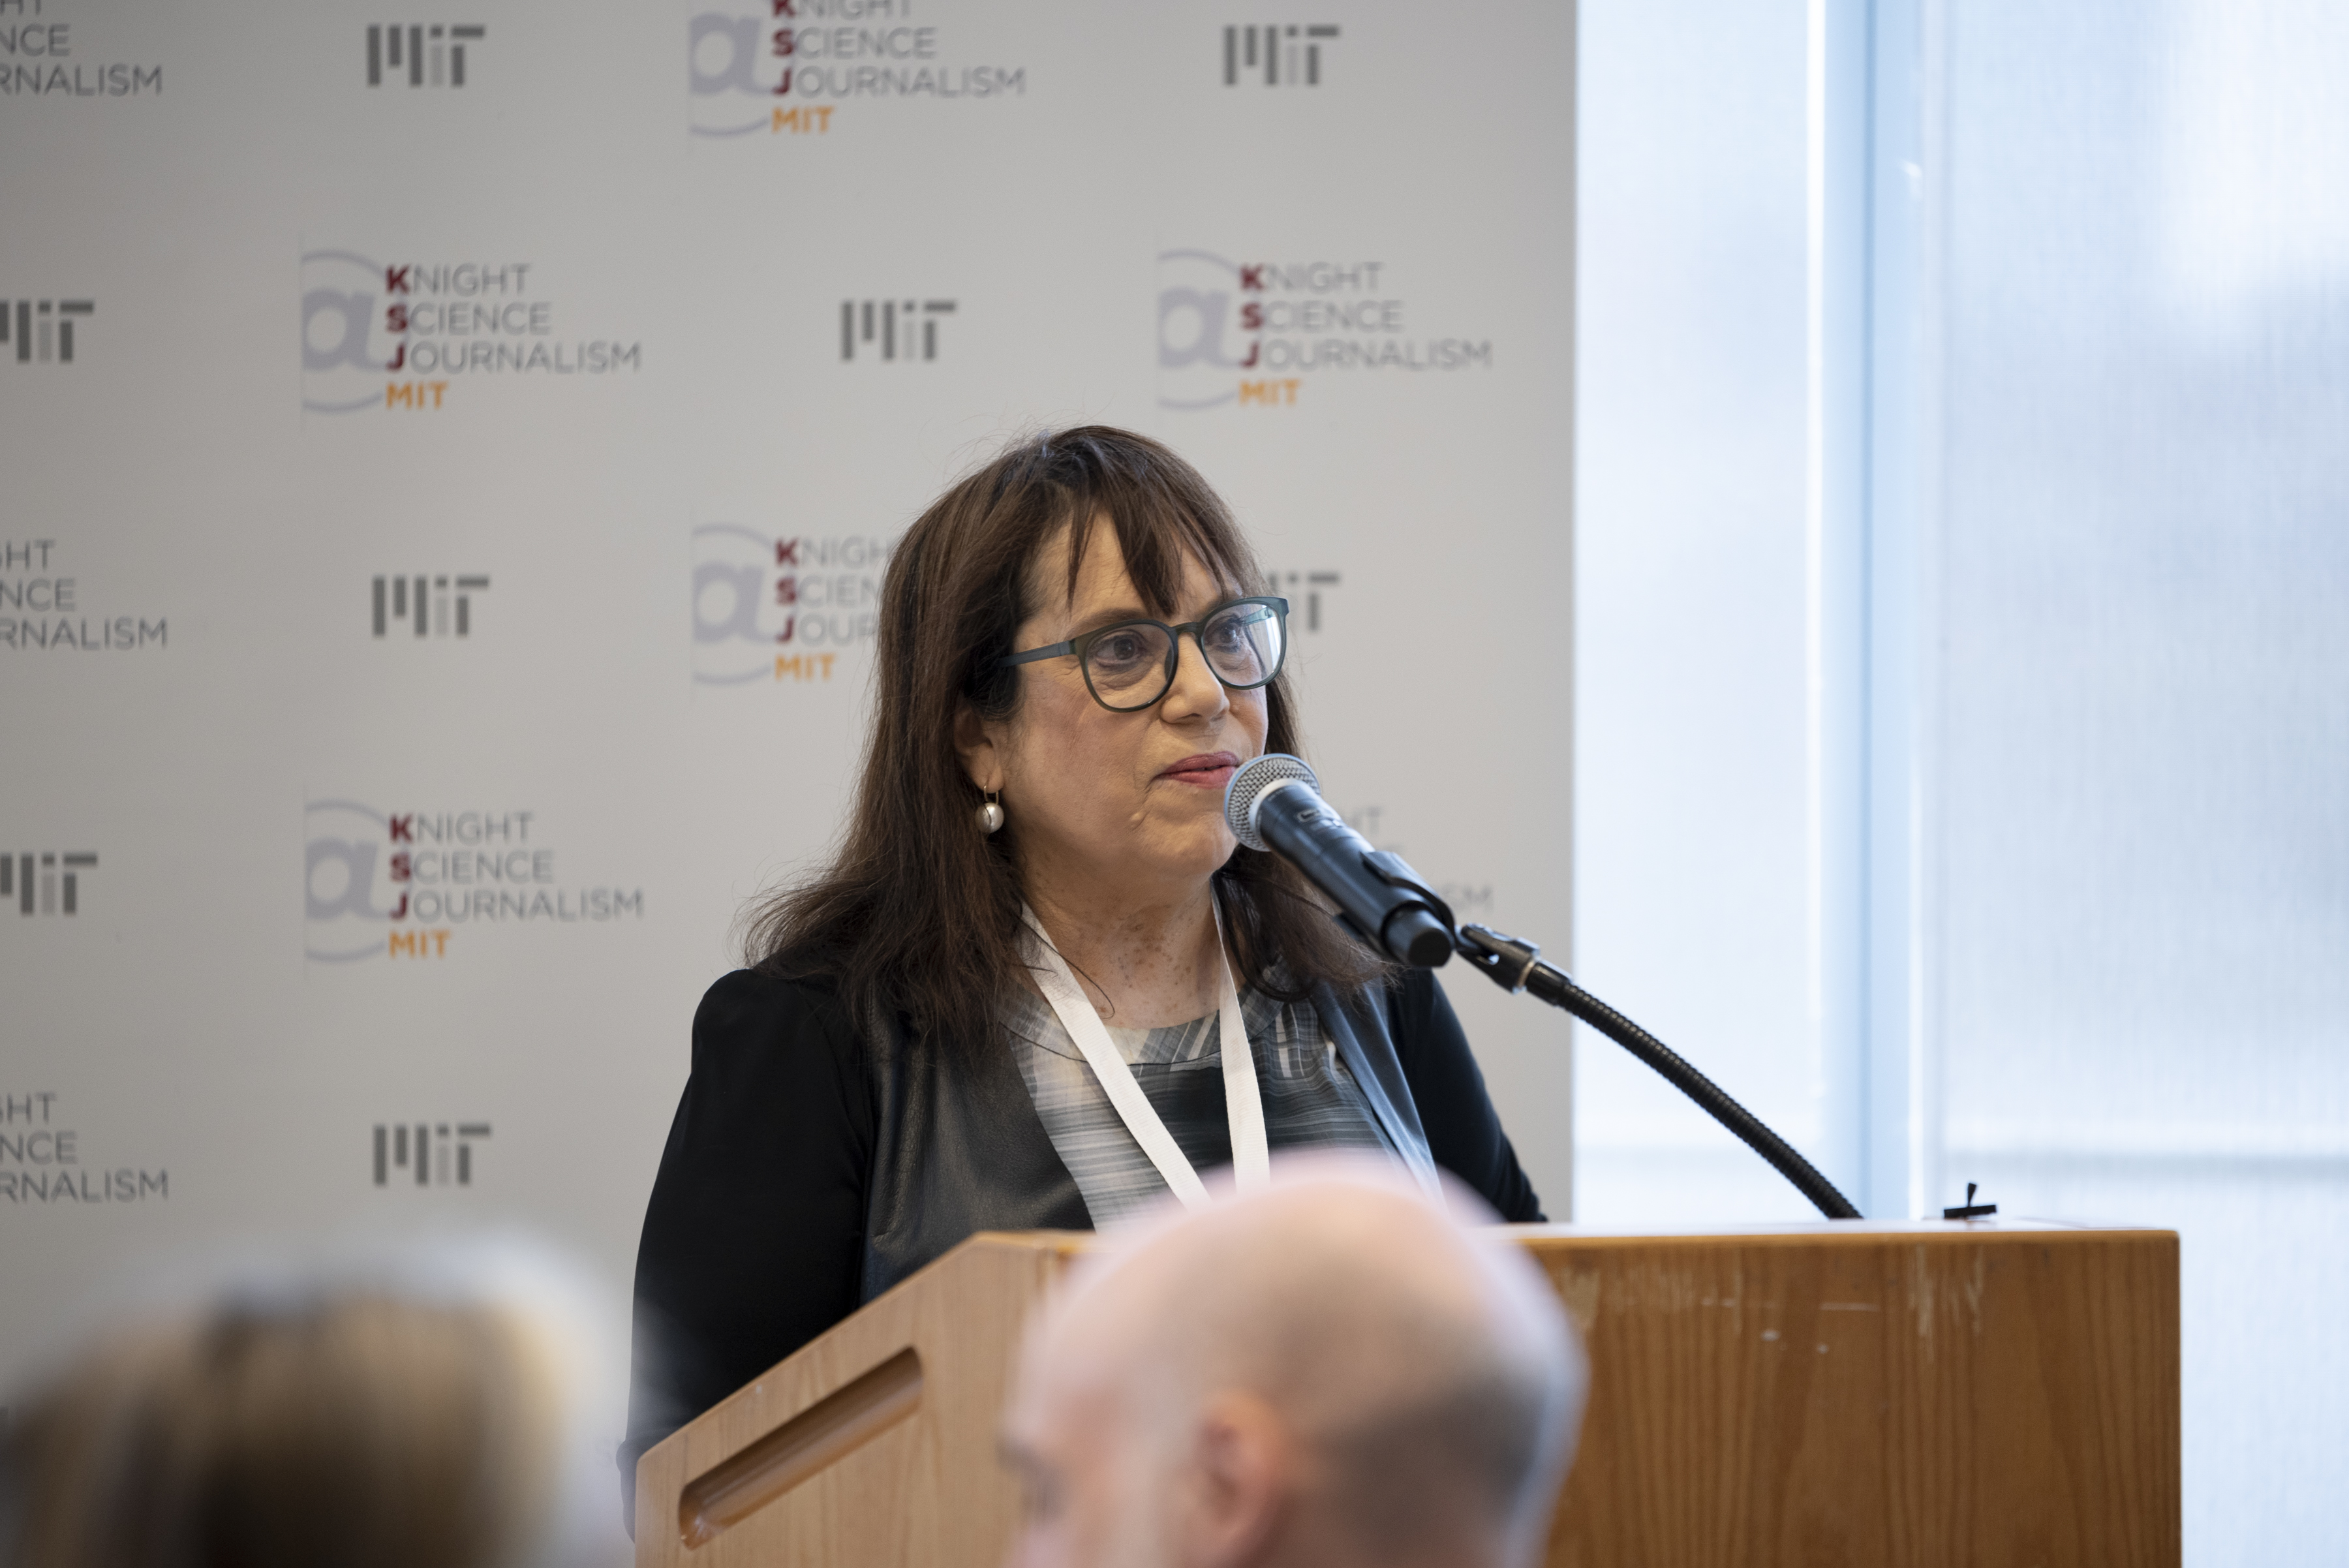 Knight Science Journalism Program Director Deborah Blum addresses the audience at the Victor K. McElheny Awards. She's wearing a black jacket with a satin collar and grey print scoop-necked shirt. She's standing in front of a popup with Knight Science Journalism at MIT branding.